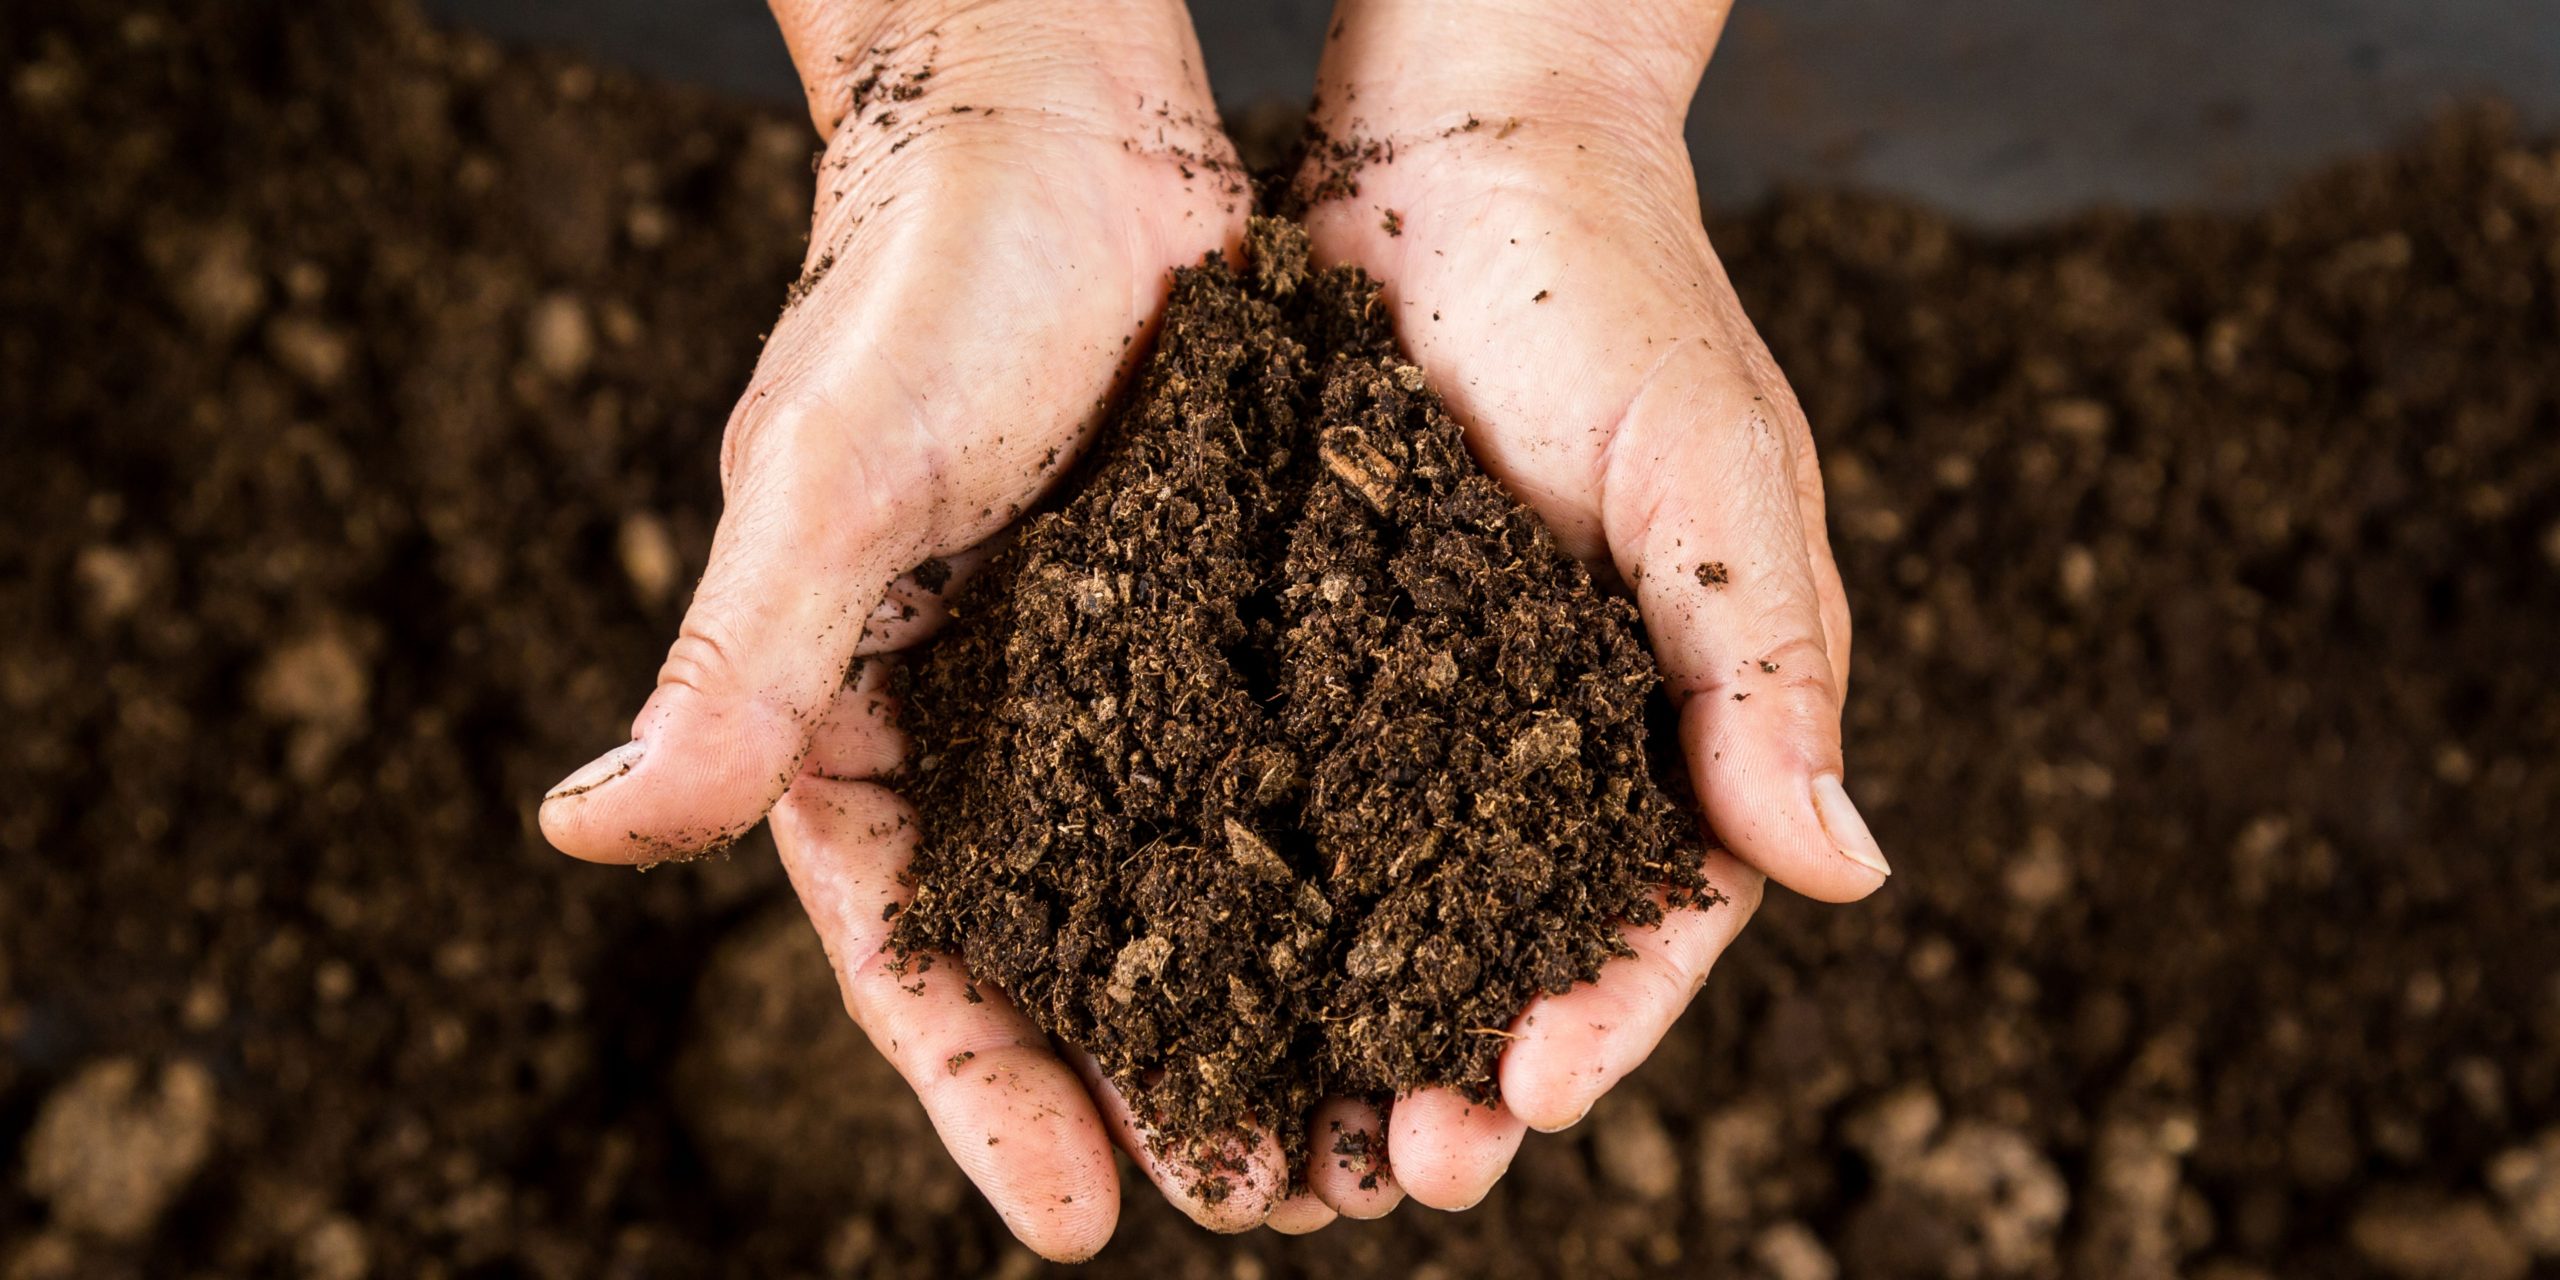 Photo shows hands holding soil, with more soil in the background